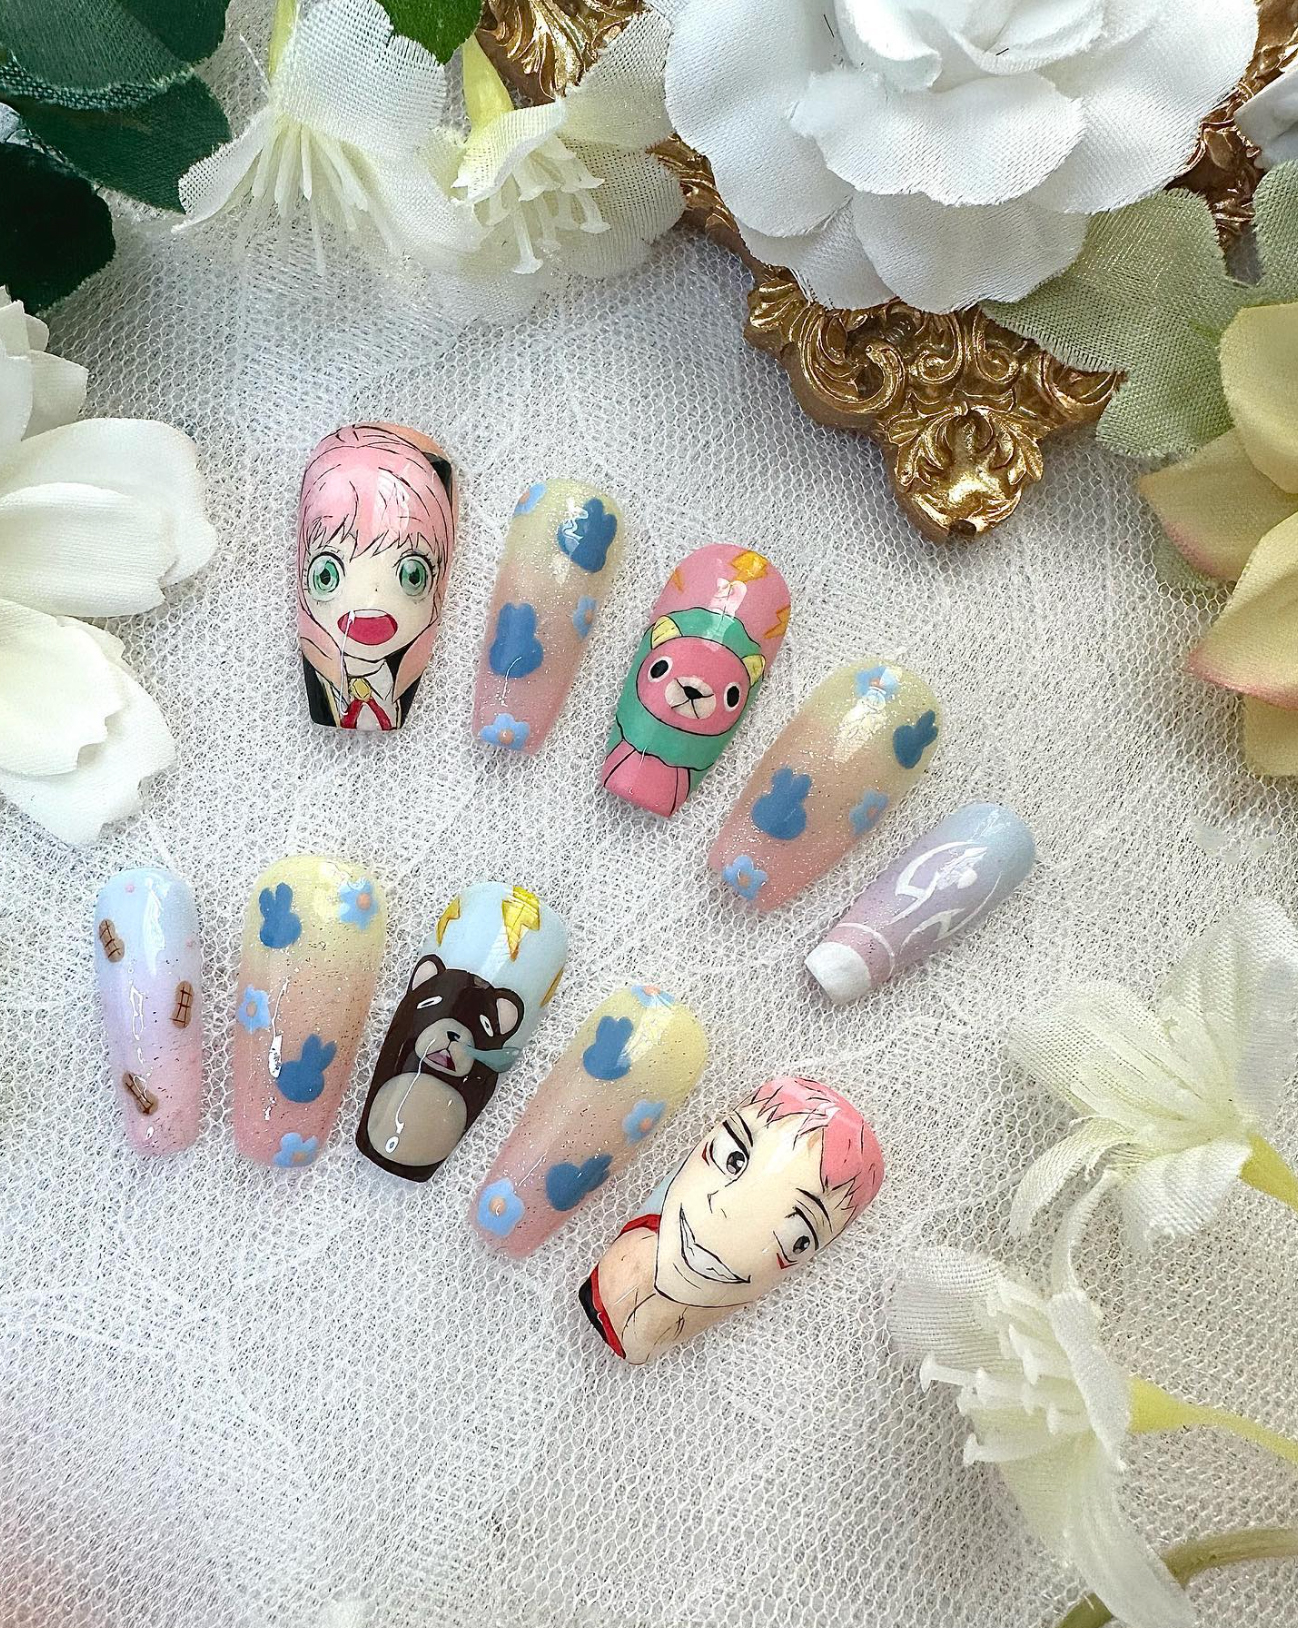 Nail art designs featuring various cartoon characters and clouds on a lace background, showcasing intricate detail.